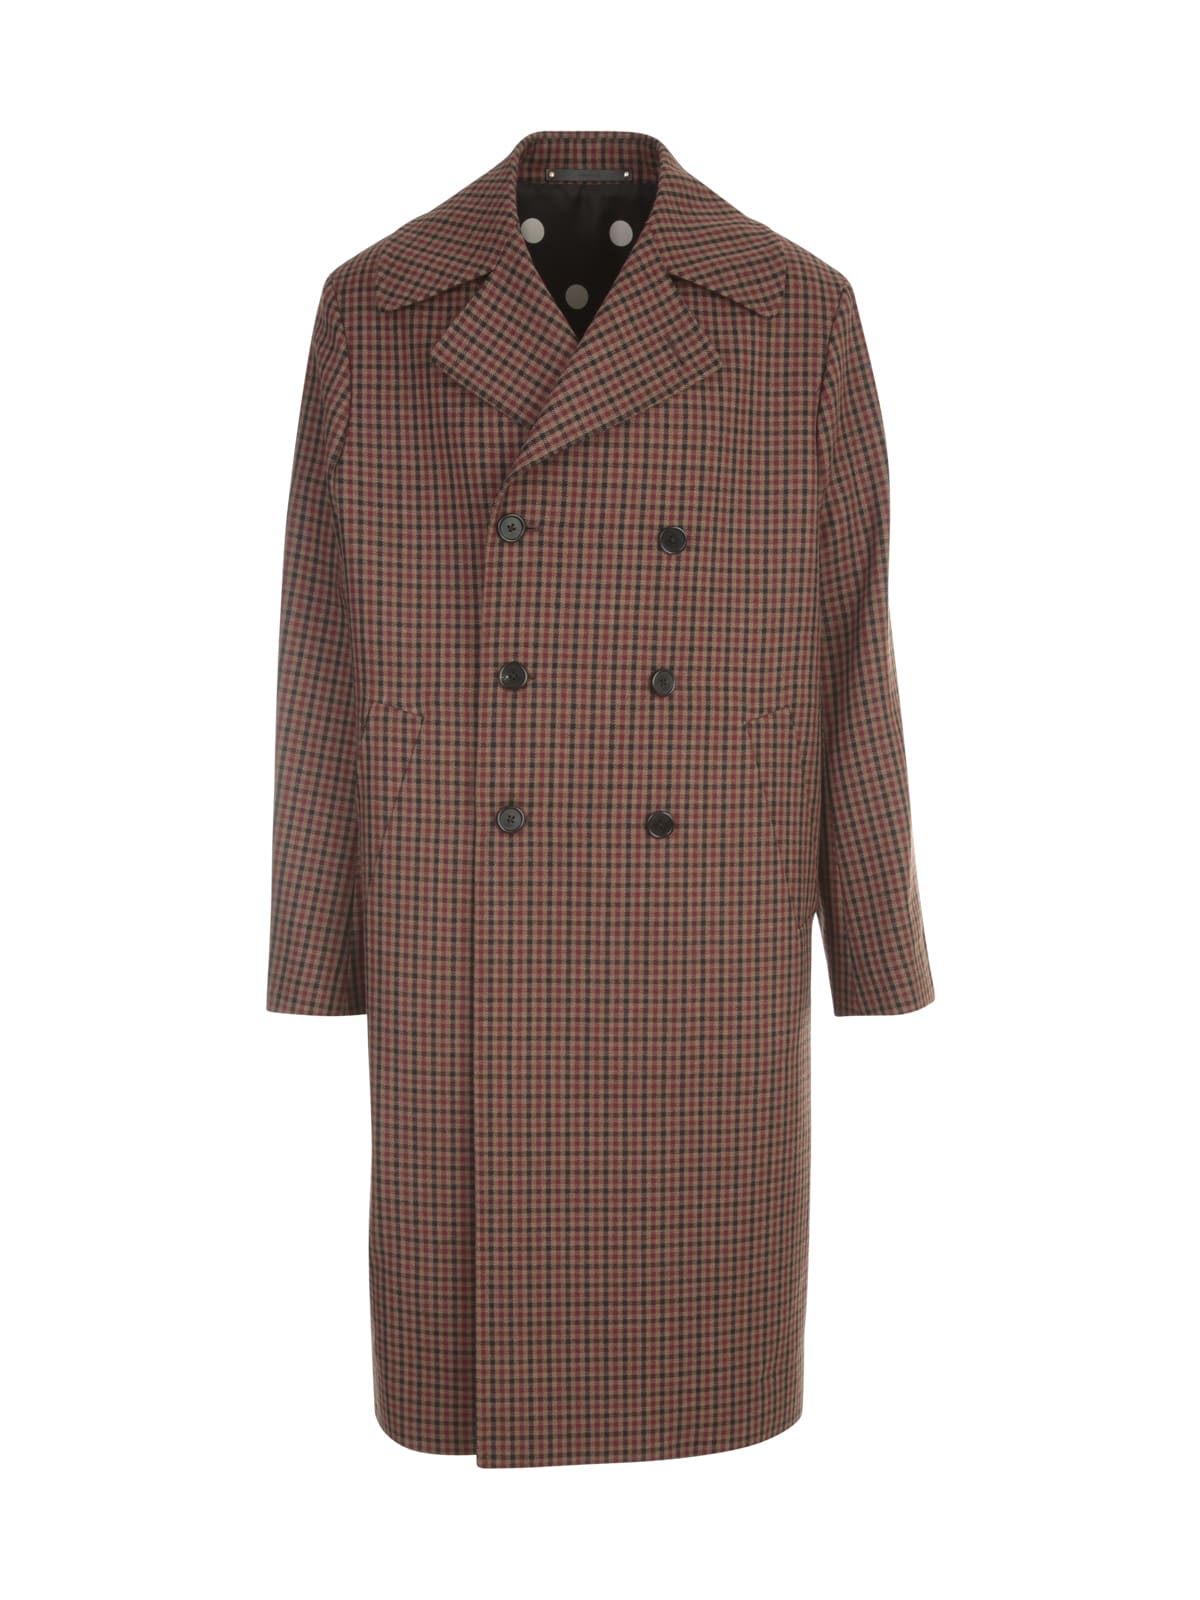 Paul Smith Gents Double Breasted Overcoat